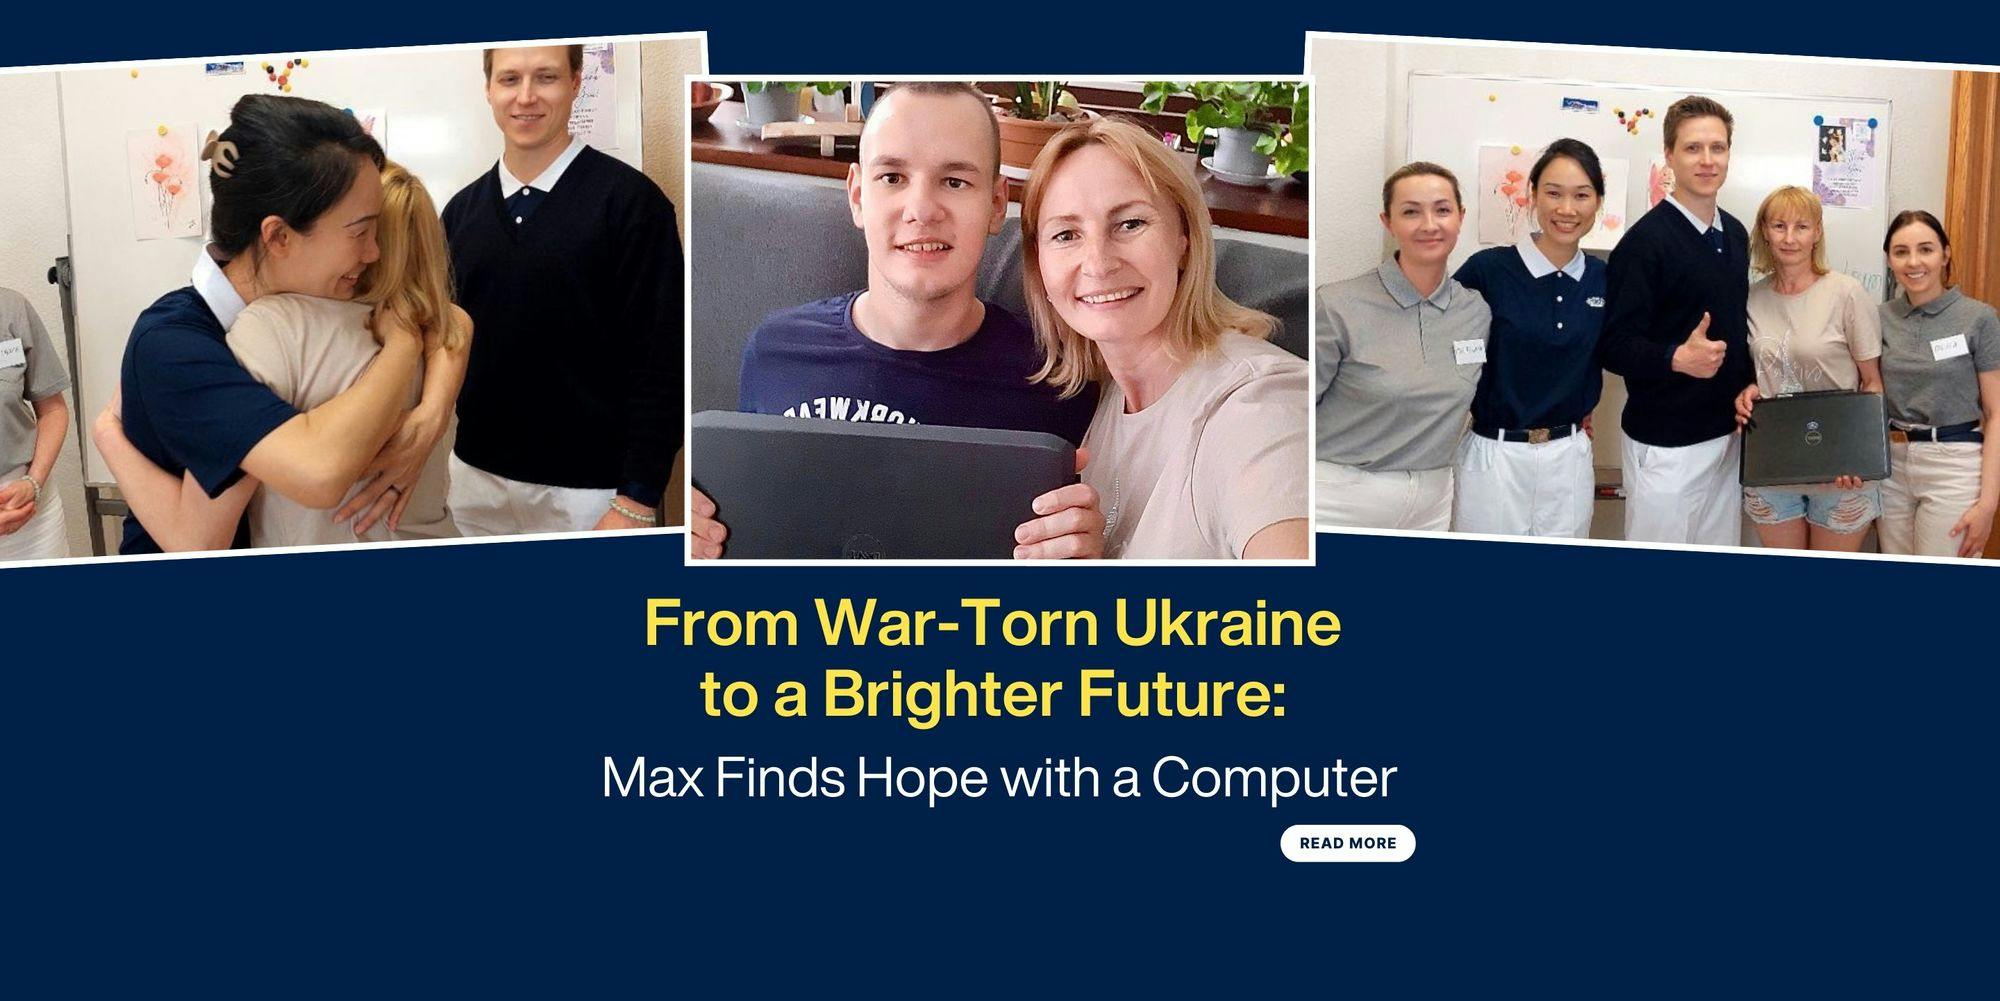 From War-Torn Ukraine to a Brighter Future: Max Finds Hope with a Computer